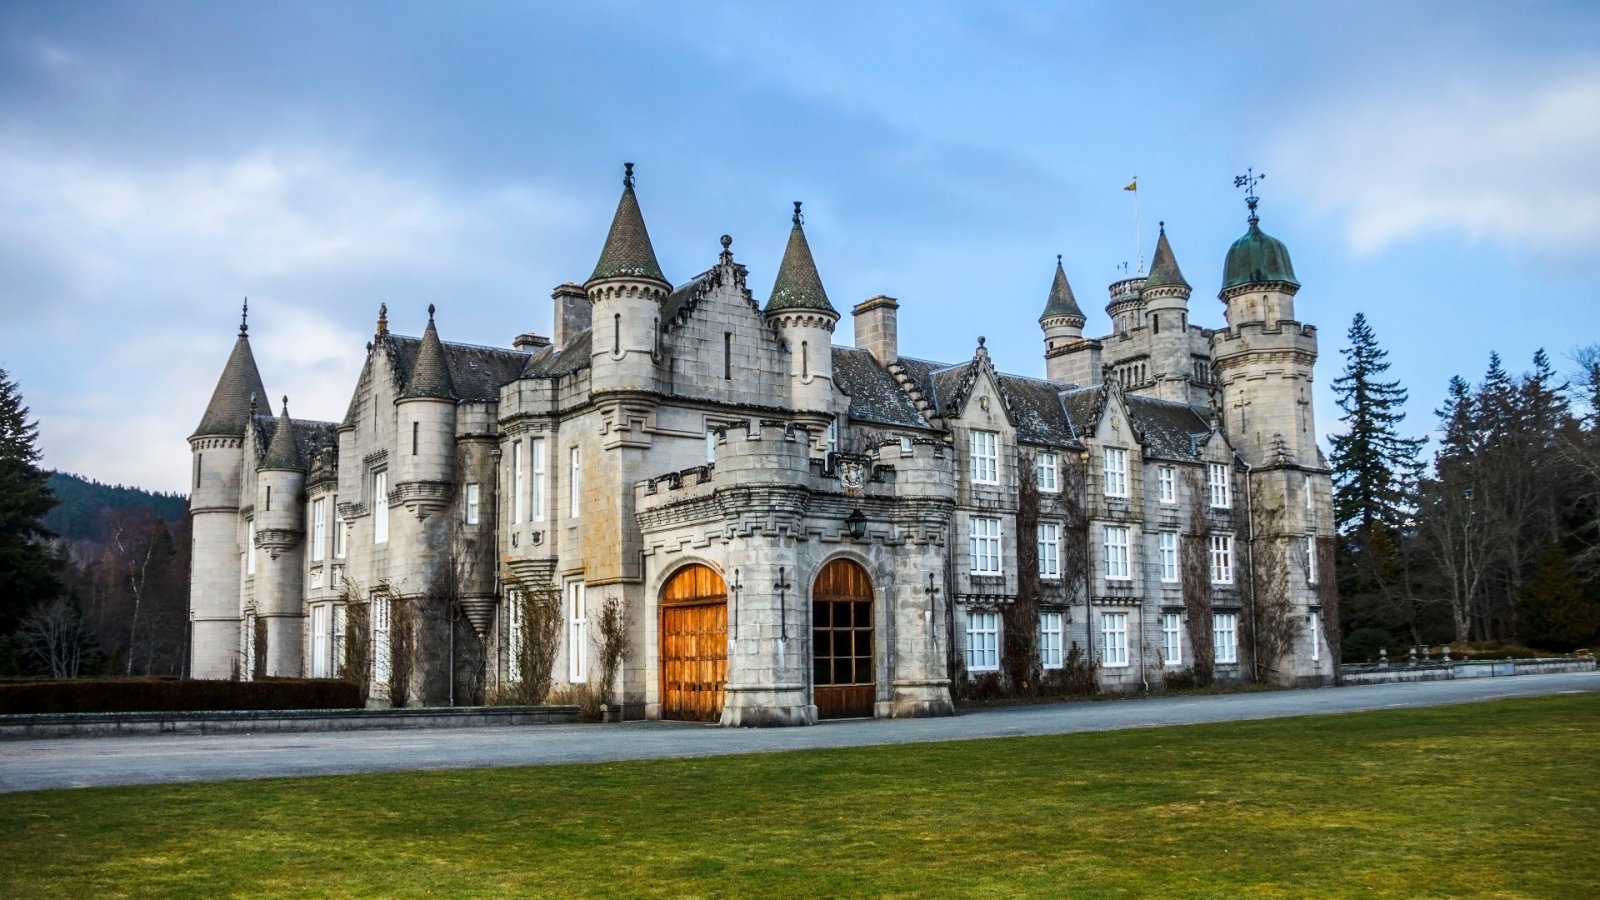 If you haven’t been to Balmoral Castle, now’s the time: the royal site reopening this spring